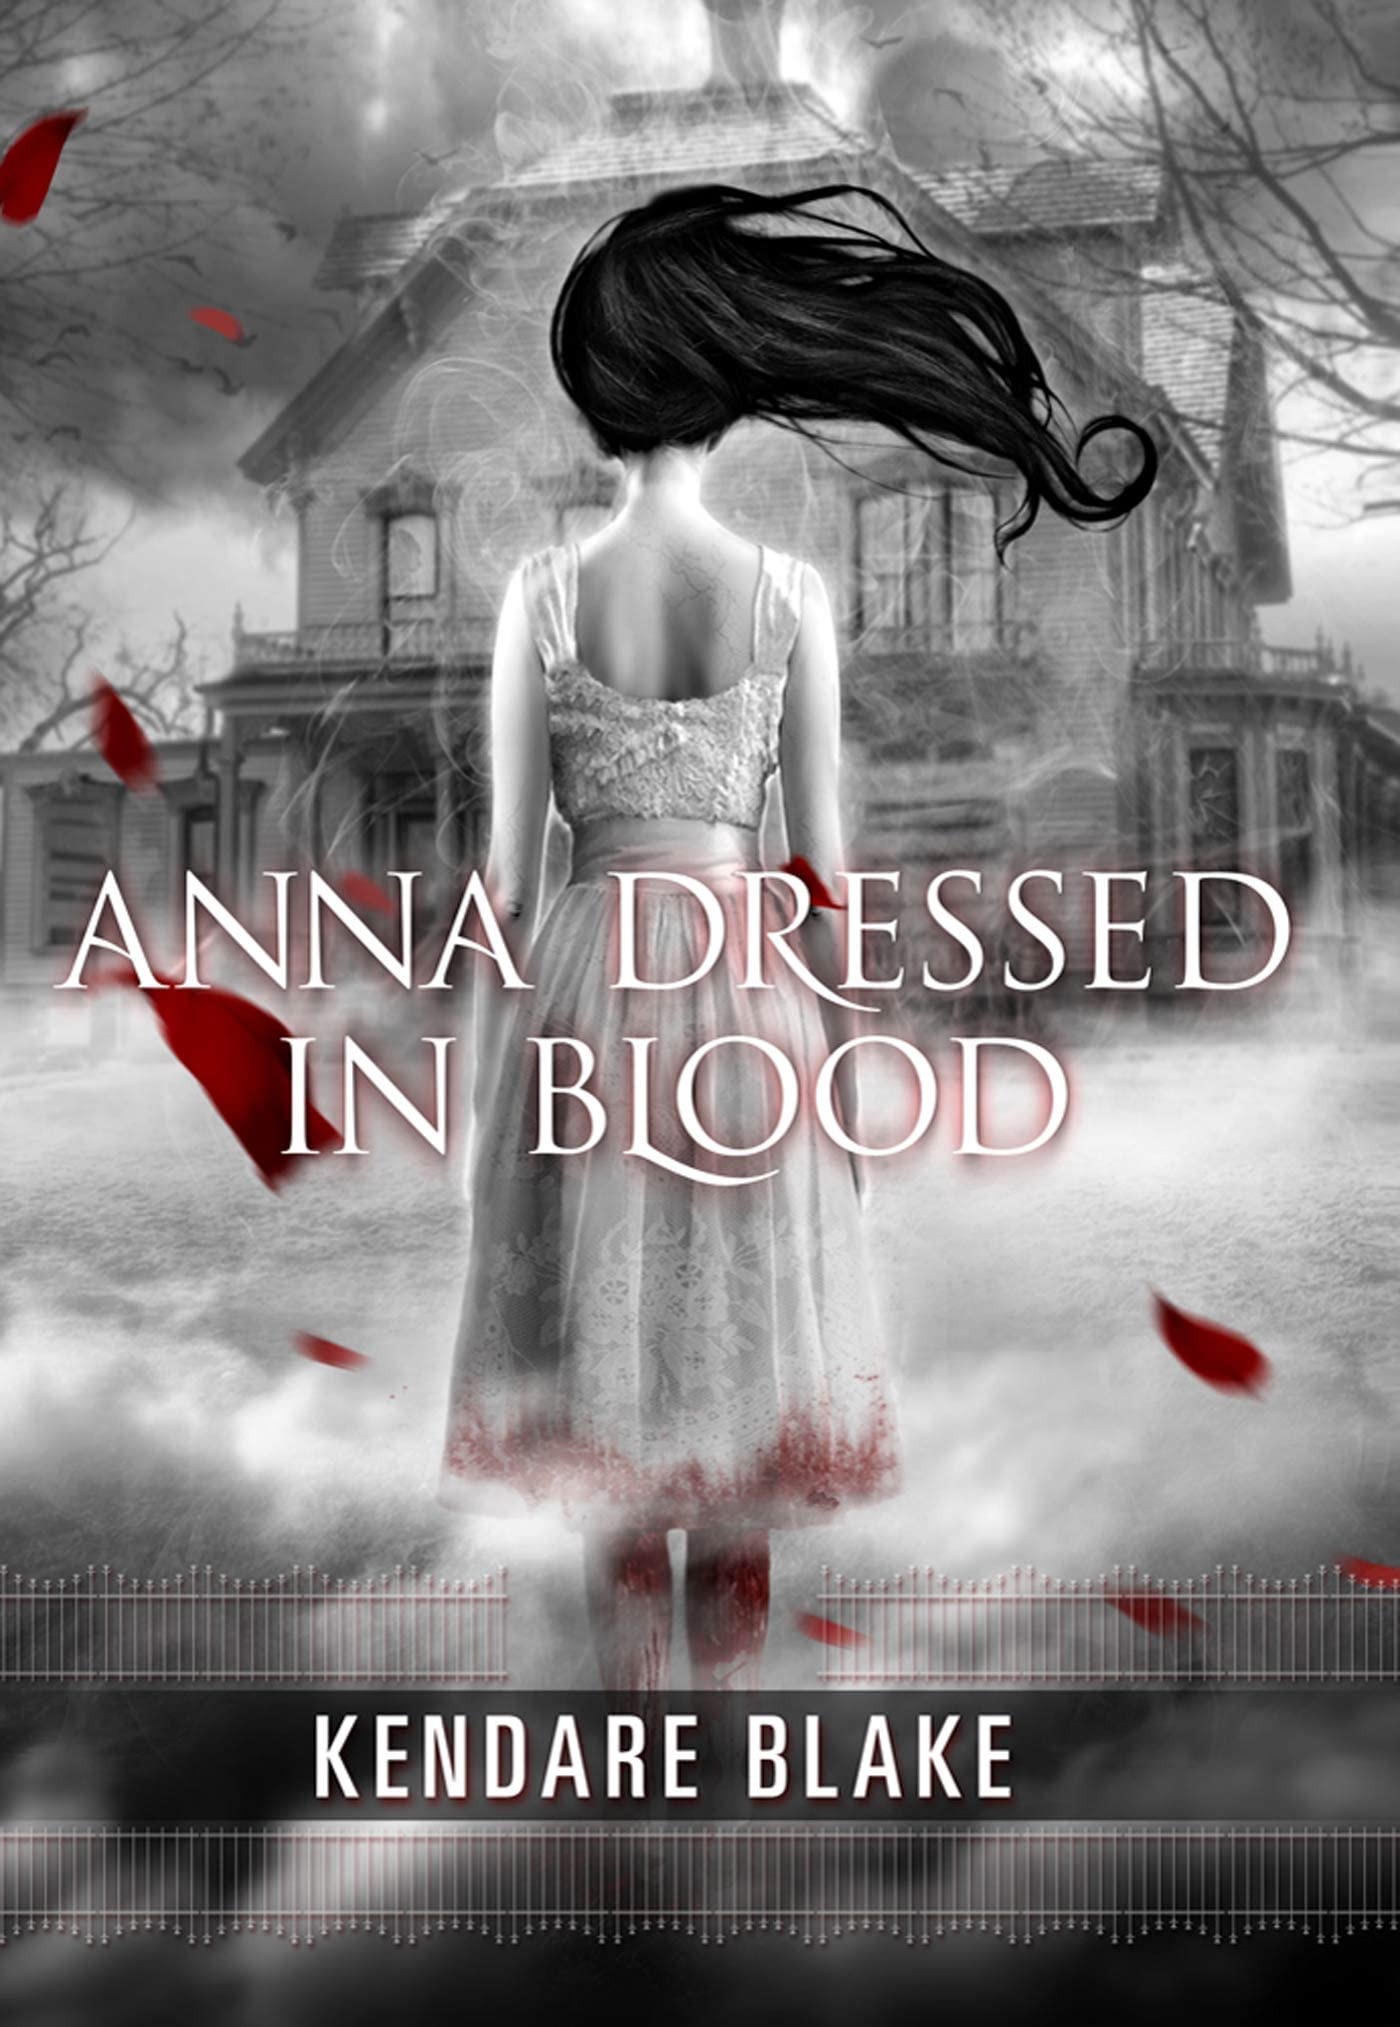 Image for "Anna Dressed in Blood" 